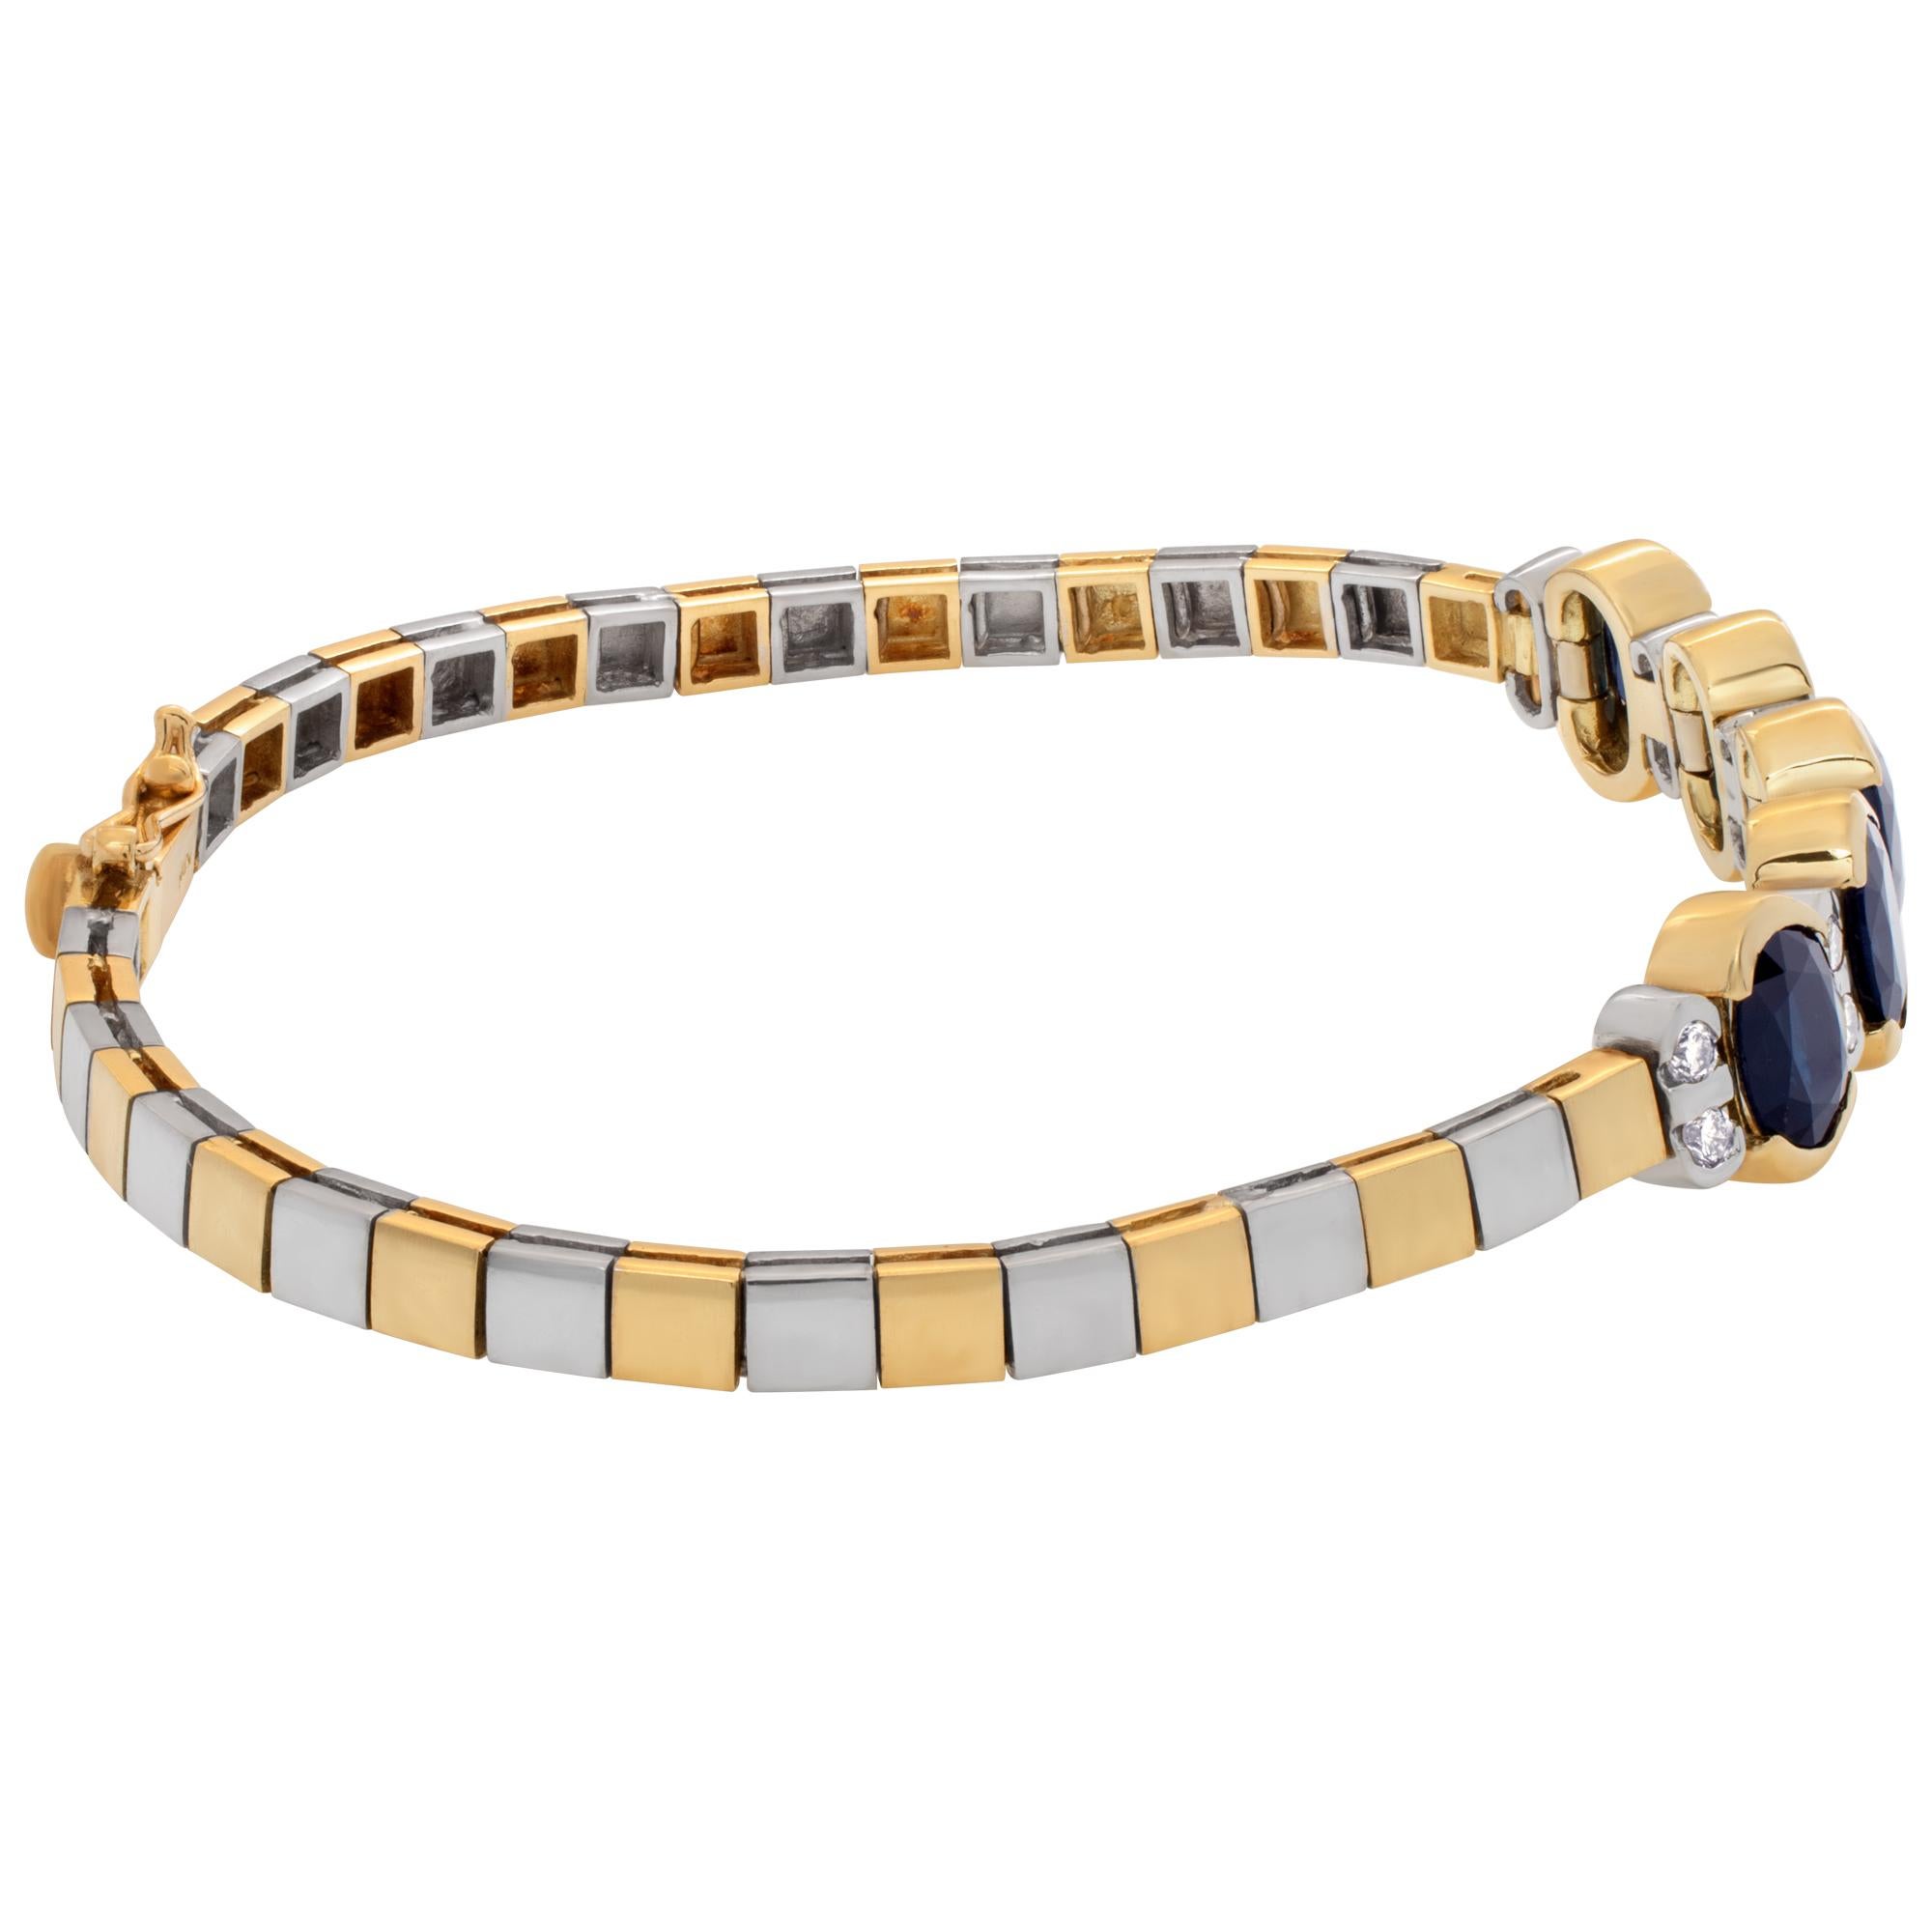 Sapphire and Diamond Bracelet Set in 14K White and Yellow Gold In Excellent Condition For Sale In Surfside, FL